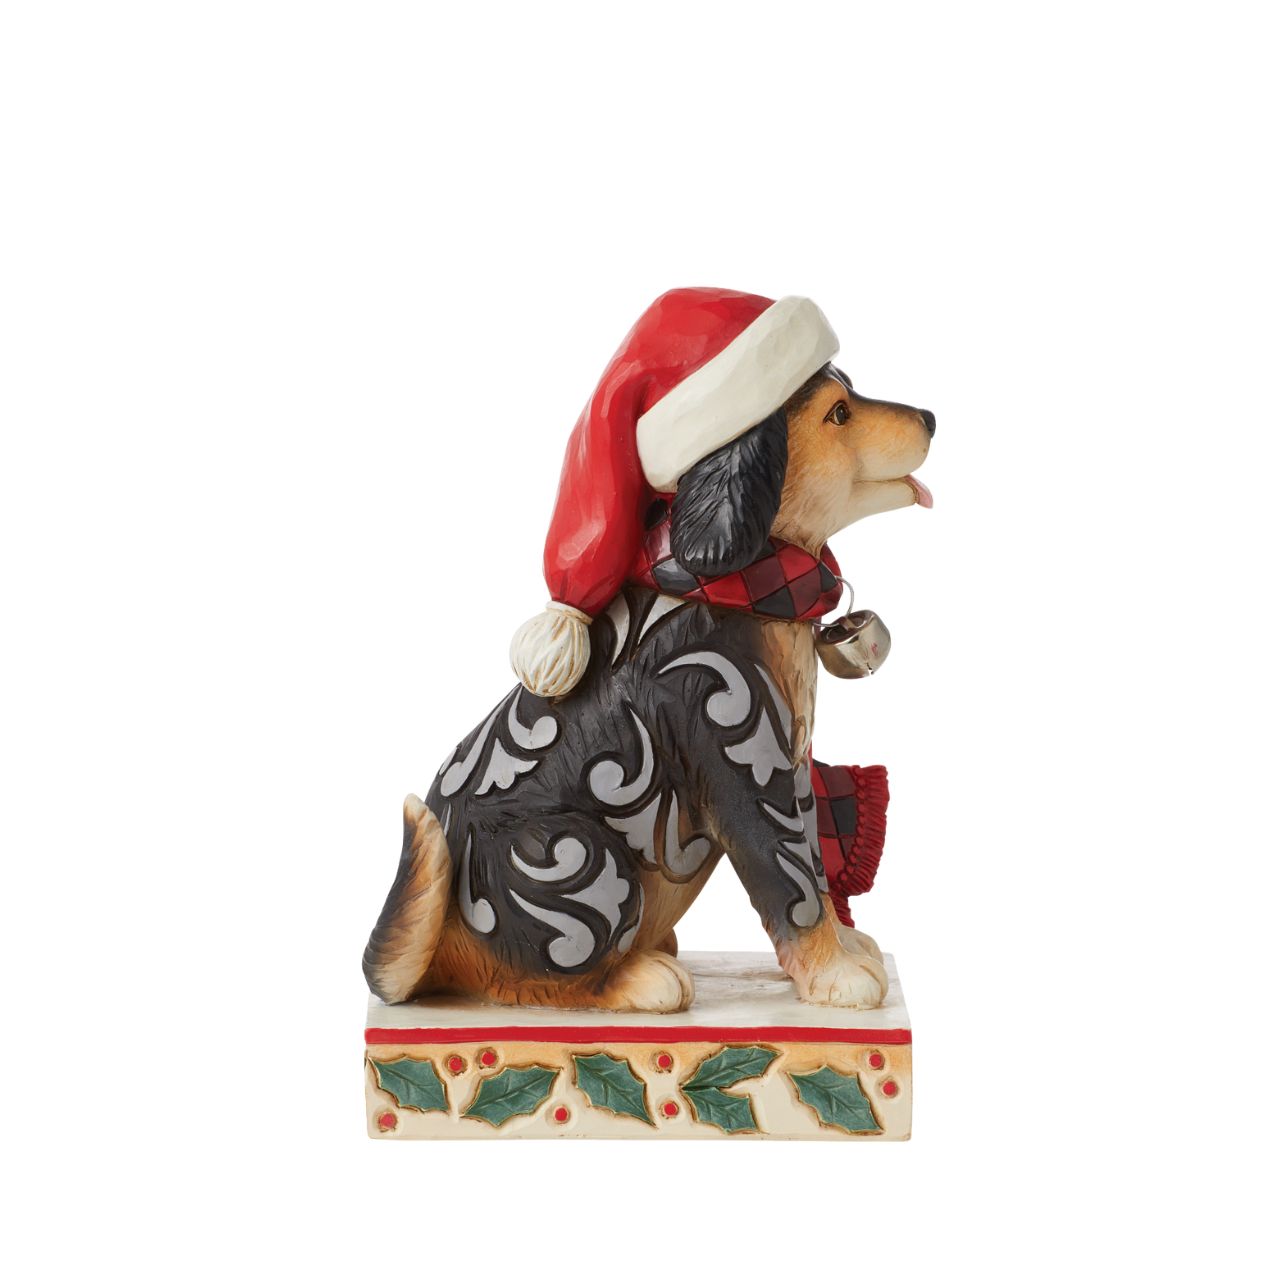 Heartwood Creek Highland Glen Dog in Santa Hat Figurine  Designed by award winning artist Jim Shore as part of the Heartwood Creek Highland Glen Collection, hand crafted using high quality cast stone and hand painted, this cute & cosy dog is perfect for the Christmas season.